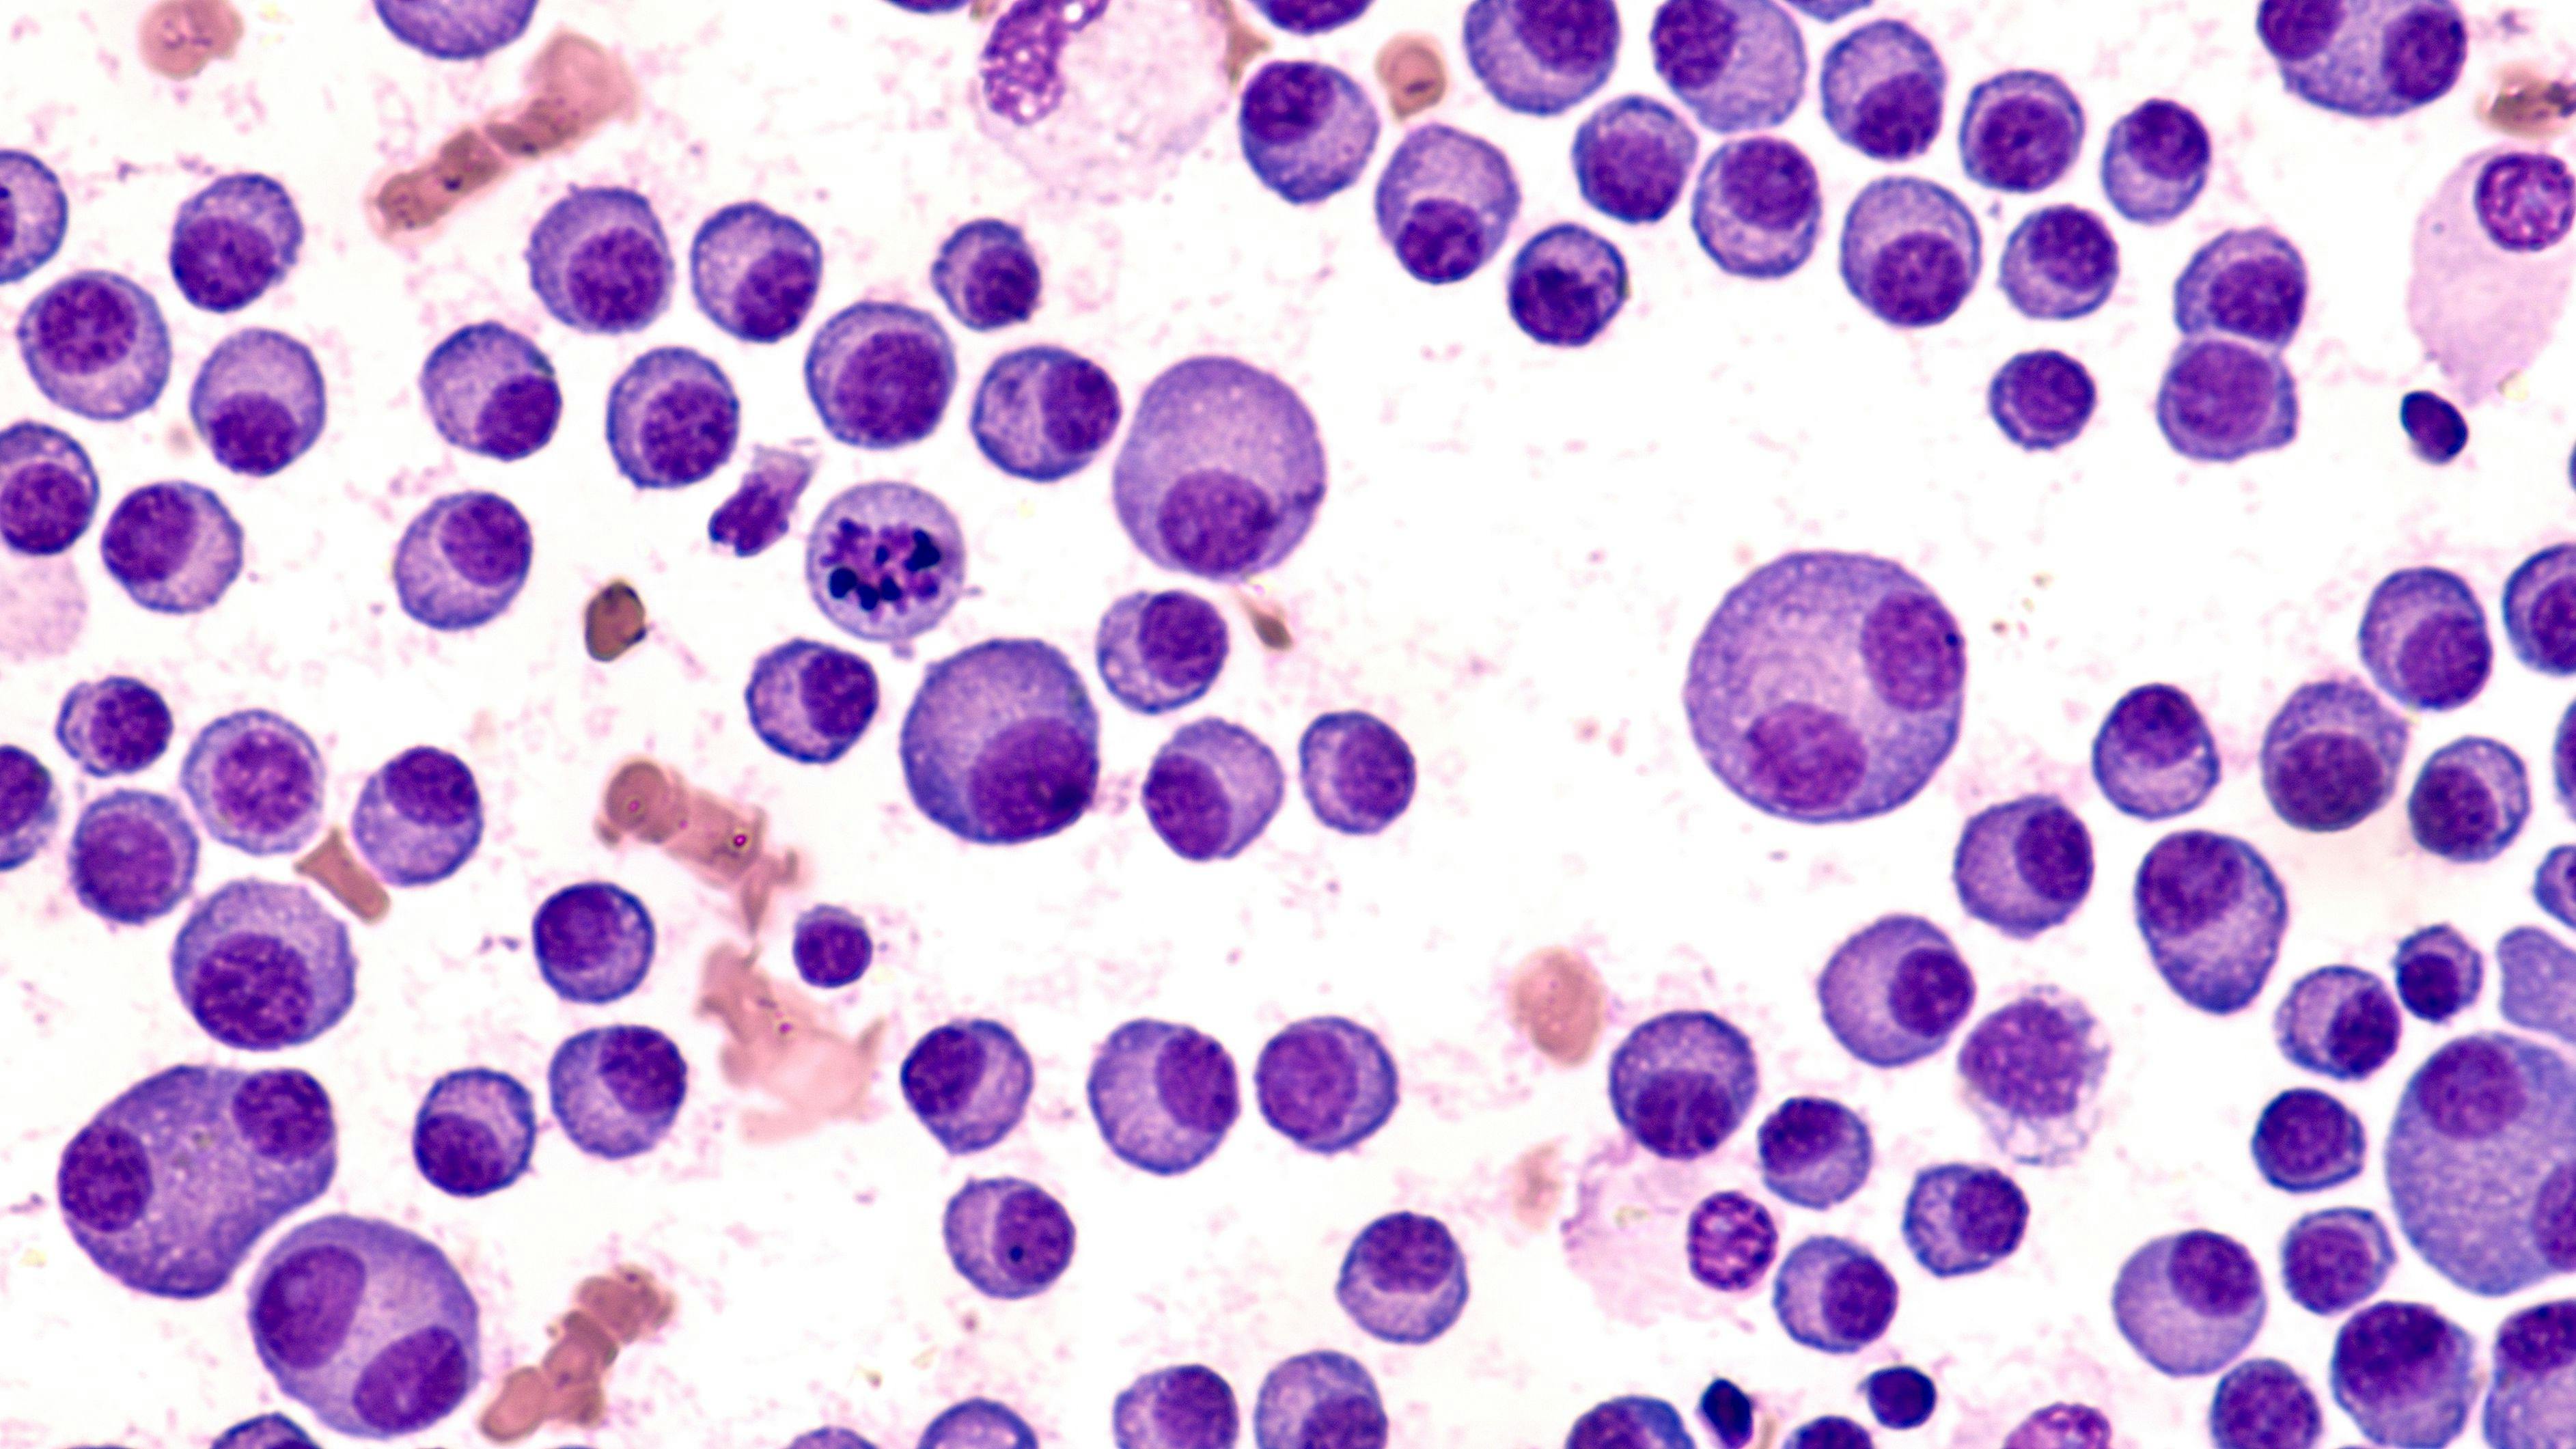 Multiple Myeloma Awareness: Bone marrow aspirate cytology of multiple myeloma, a type of bone marrow cancer of malignant plasma cells, associated with bone pain, bone fractures and anemia